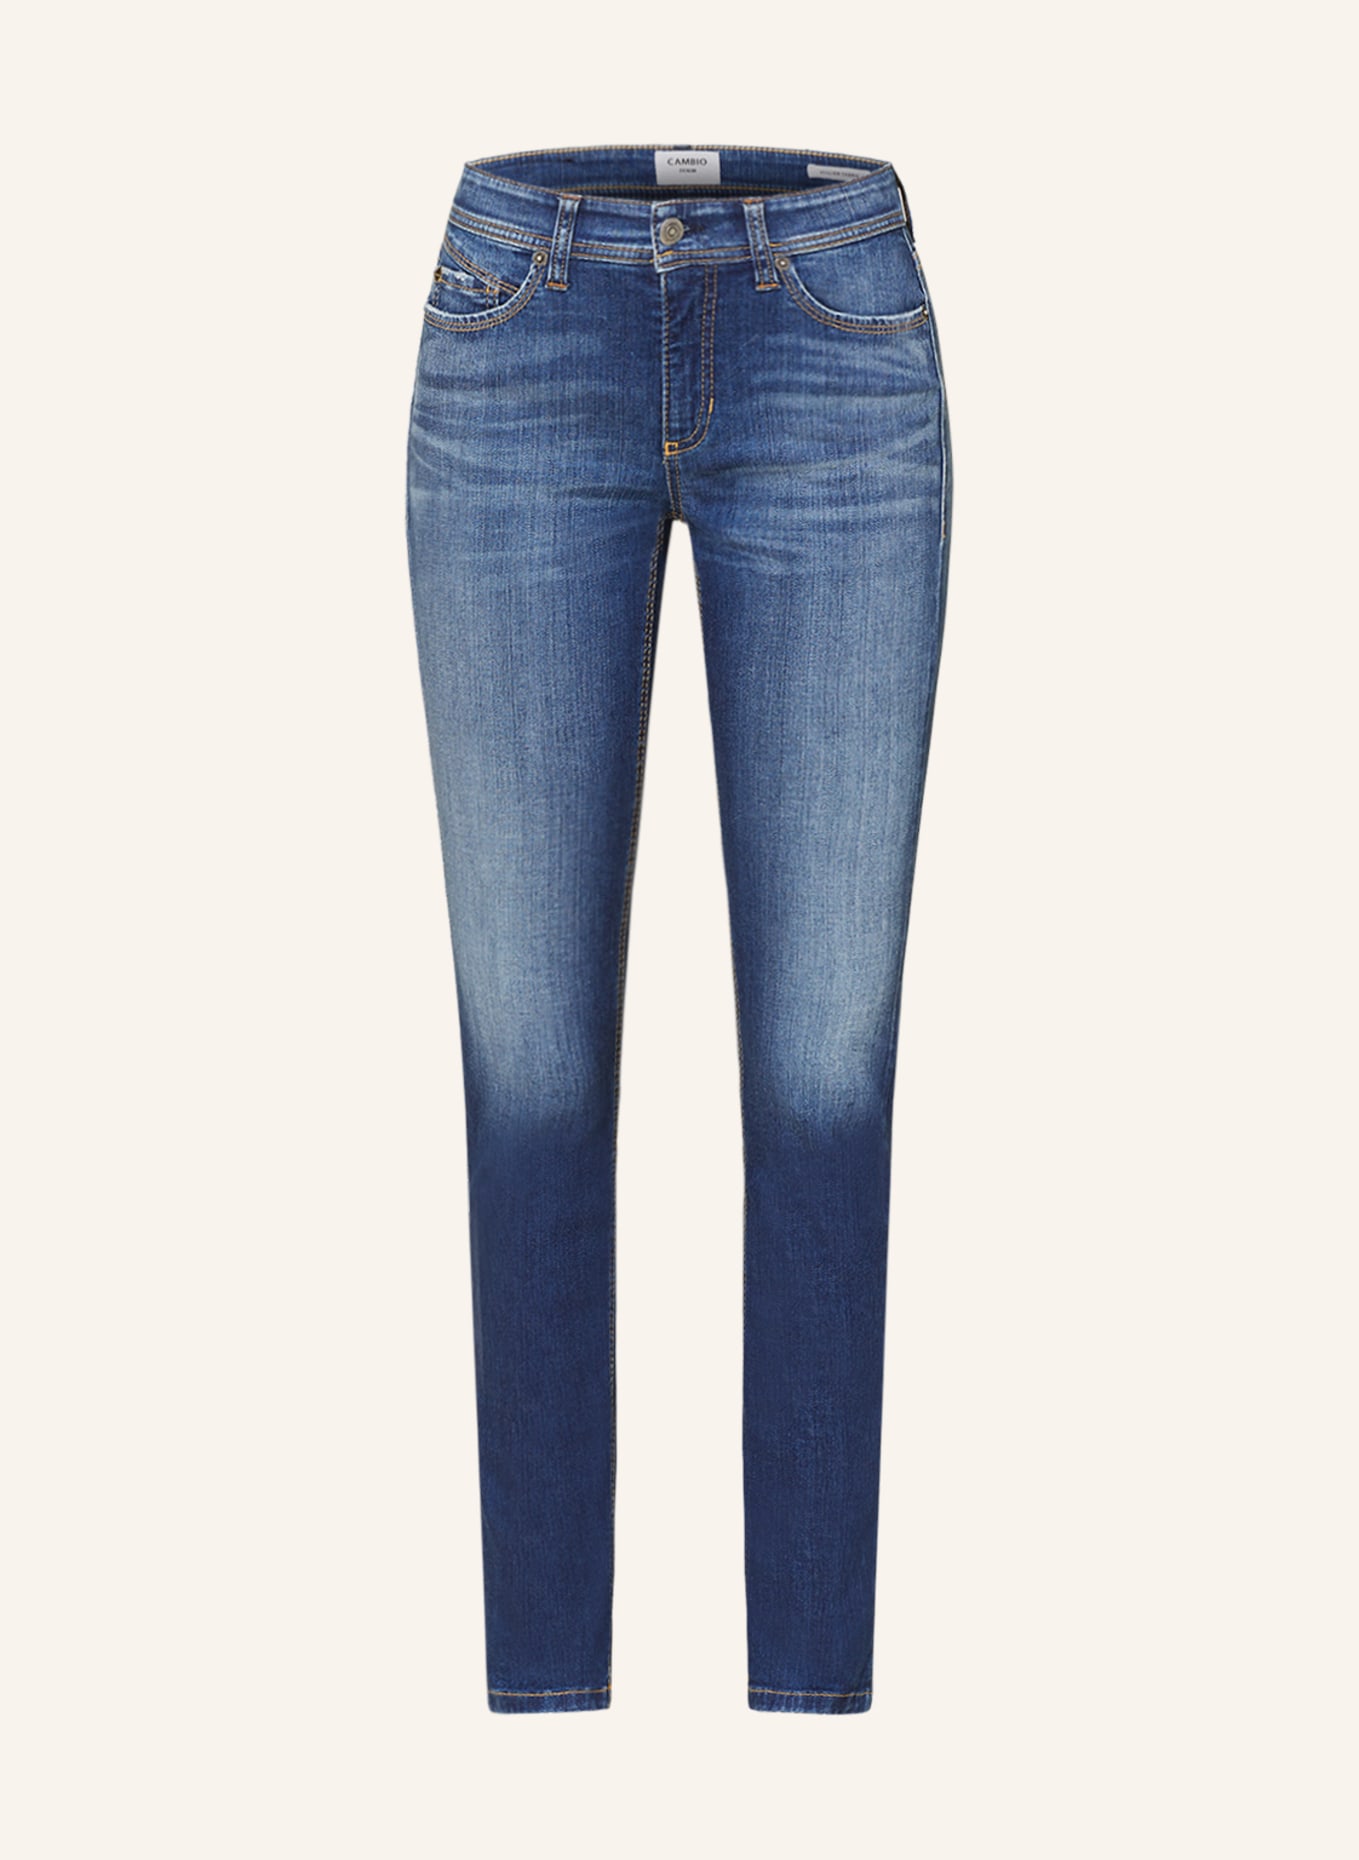 CAMBIO Skinny jeans PARLA with sequins, Color: 5061 medium contrast splinted (Image 1)